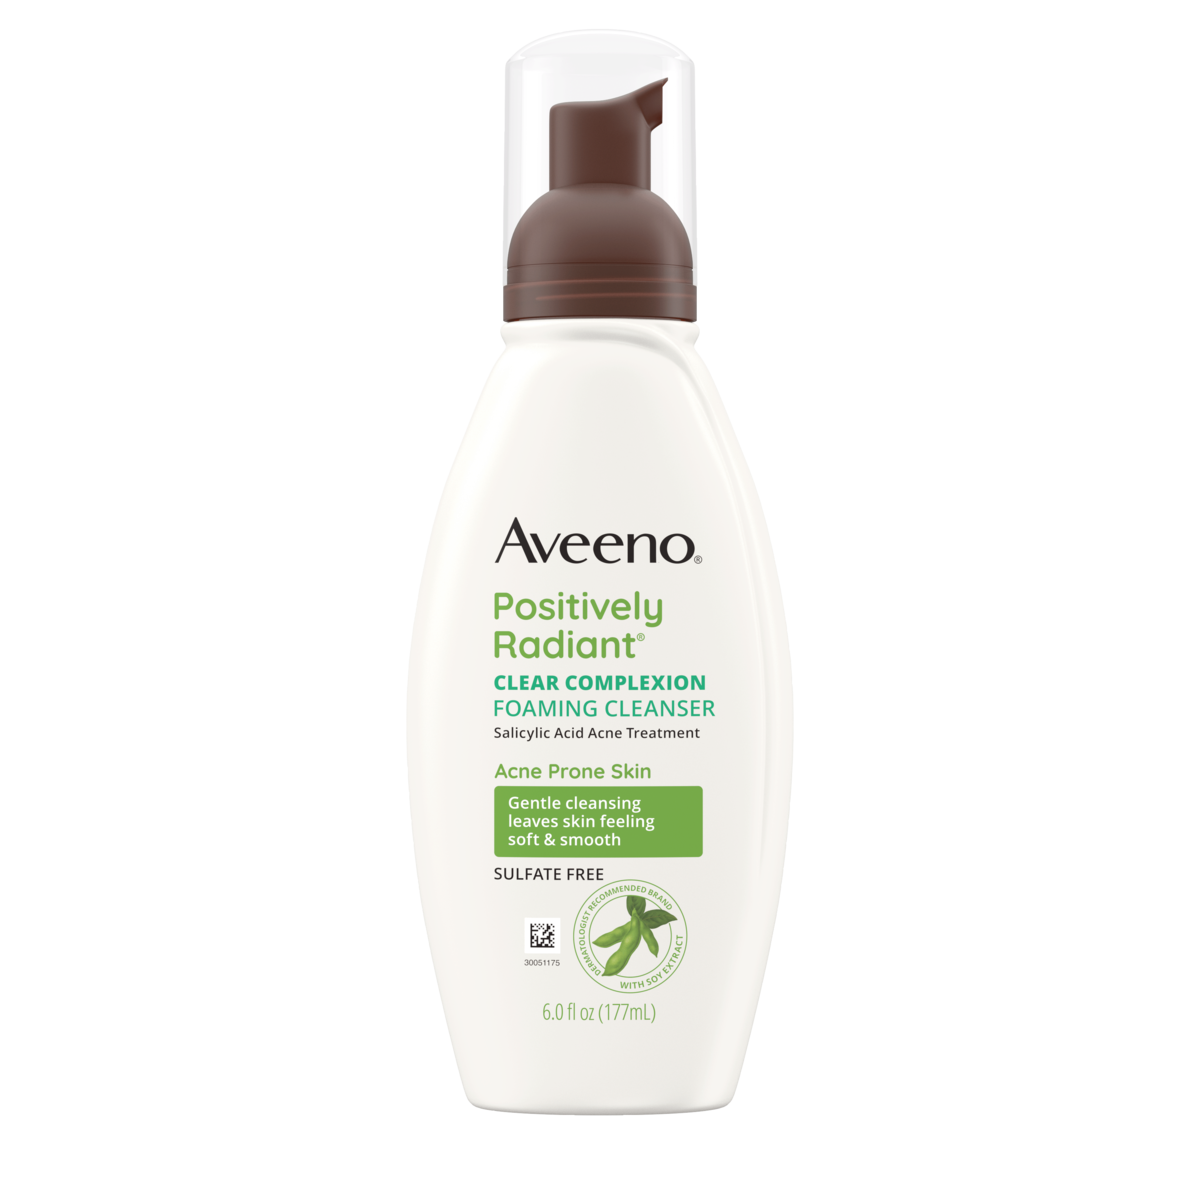 https://www.aveeno.com/sites/aveeno_us_2/files/styles/jjbos_adaptive_images_generic-desktop/public/product-images/ave_381370036913_us_clear_complexion_foaming_cleanser_6oz_00000.png